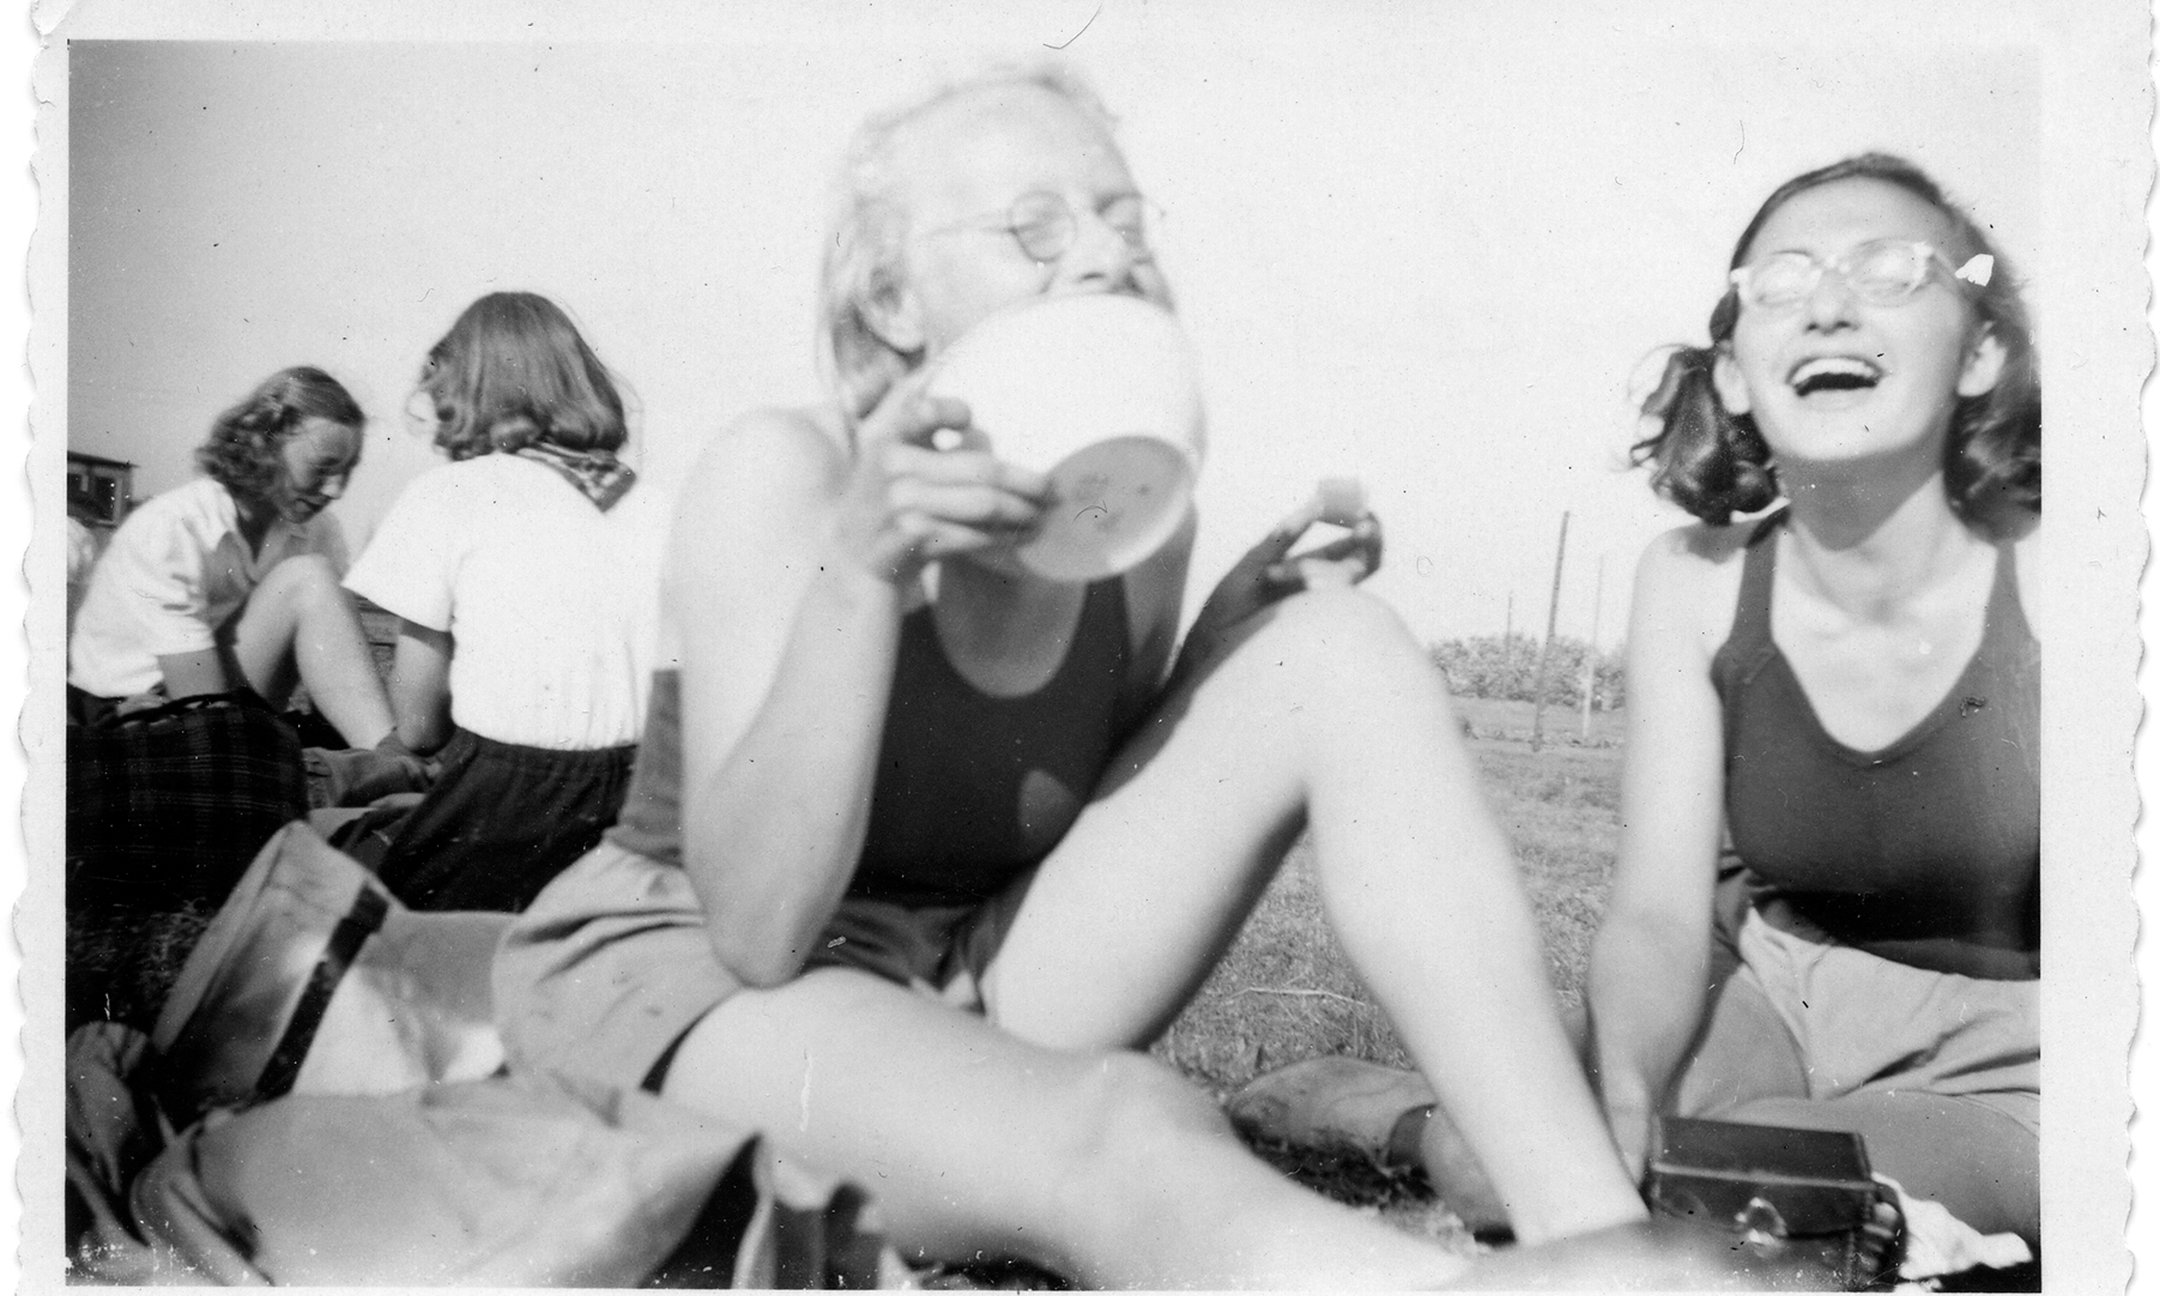 Margot (on the right) with her rowing companions, summer 1941